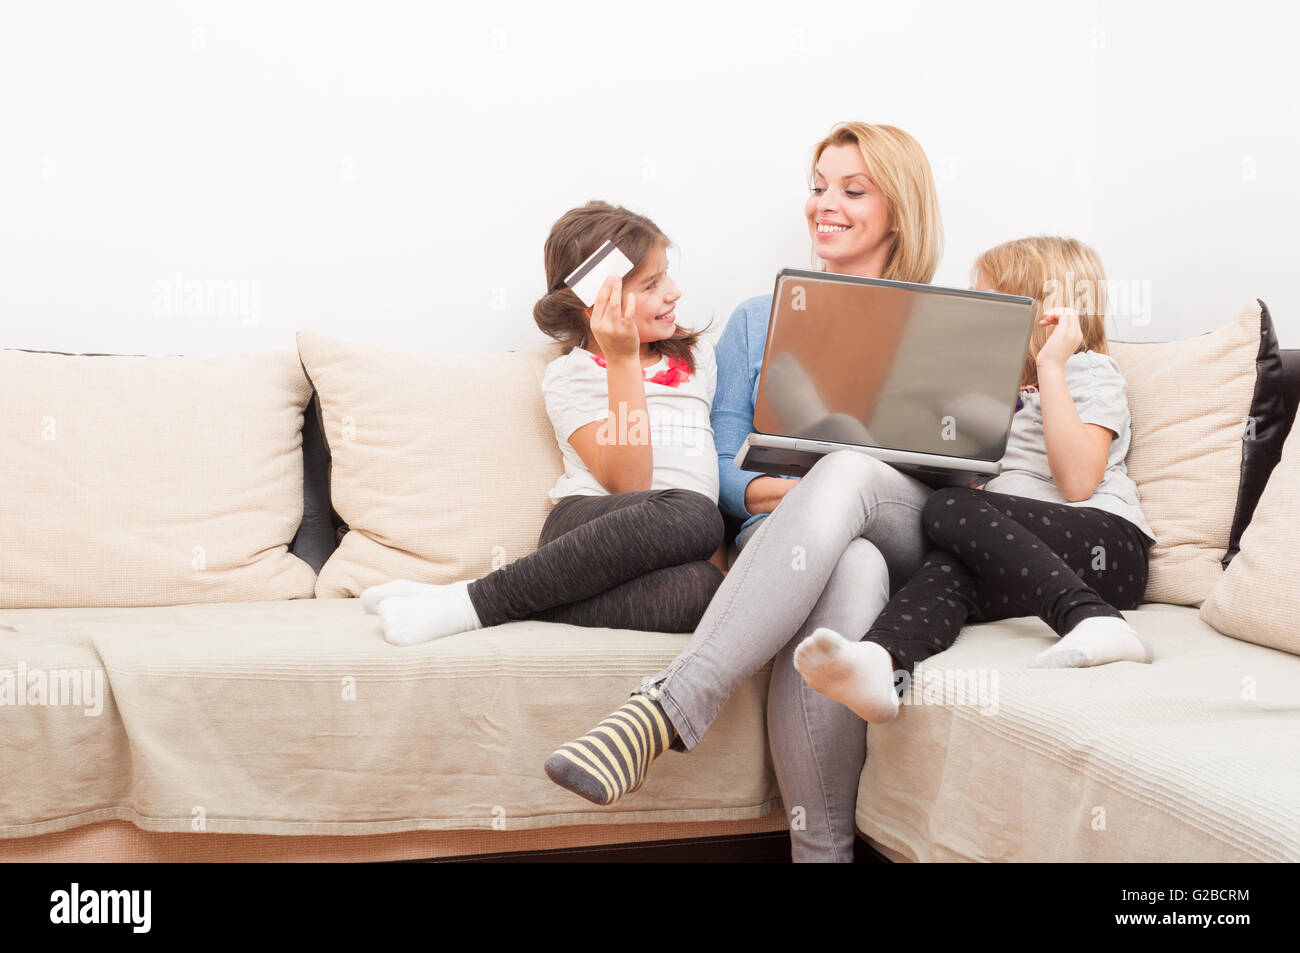 Mother and young daughters shopping online concept using laptop and credit card Stock Photo